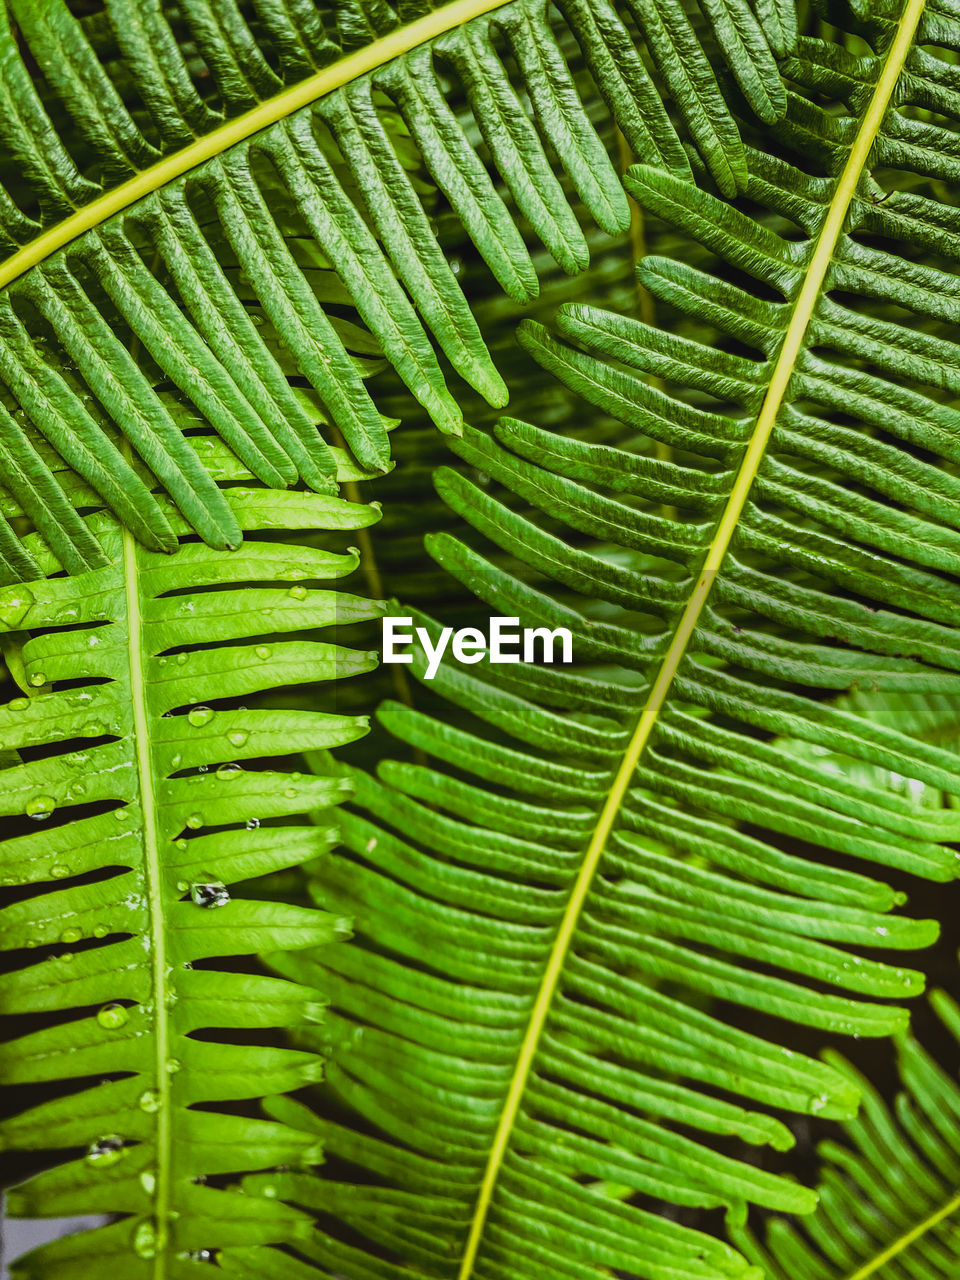 CLOSE-UP OF PALM LEAVES